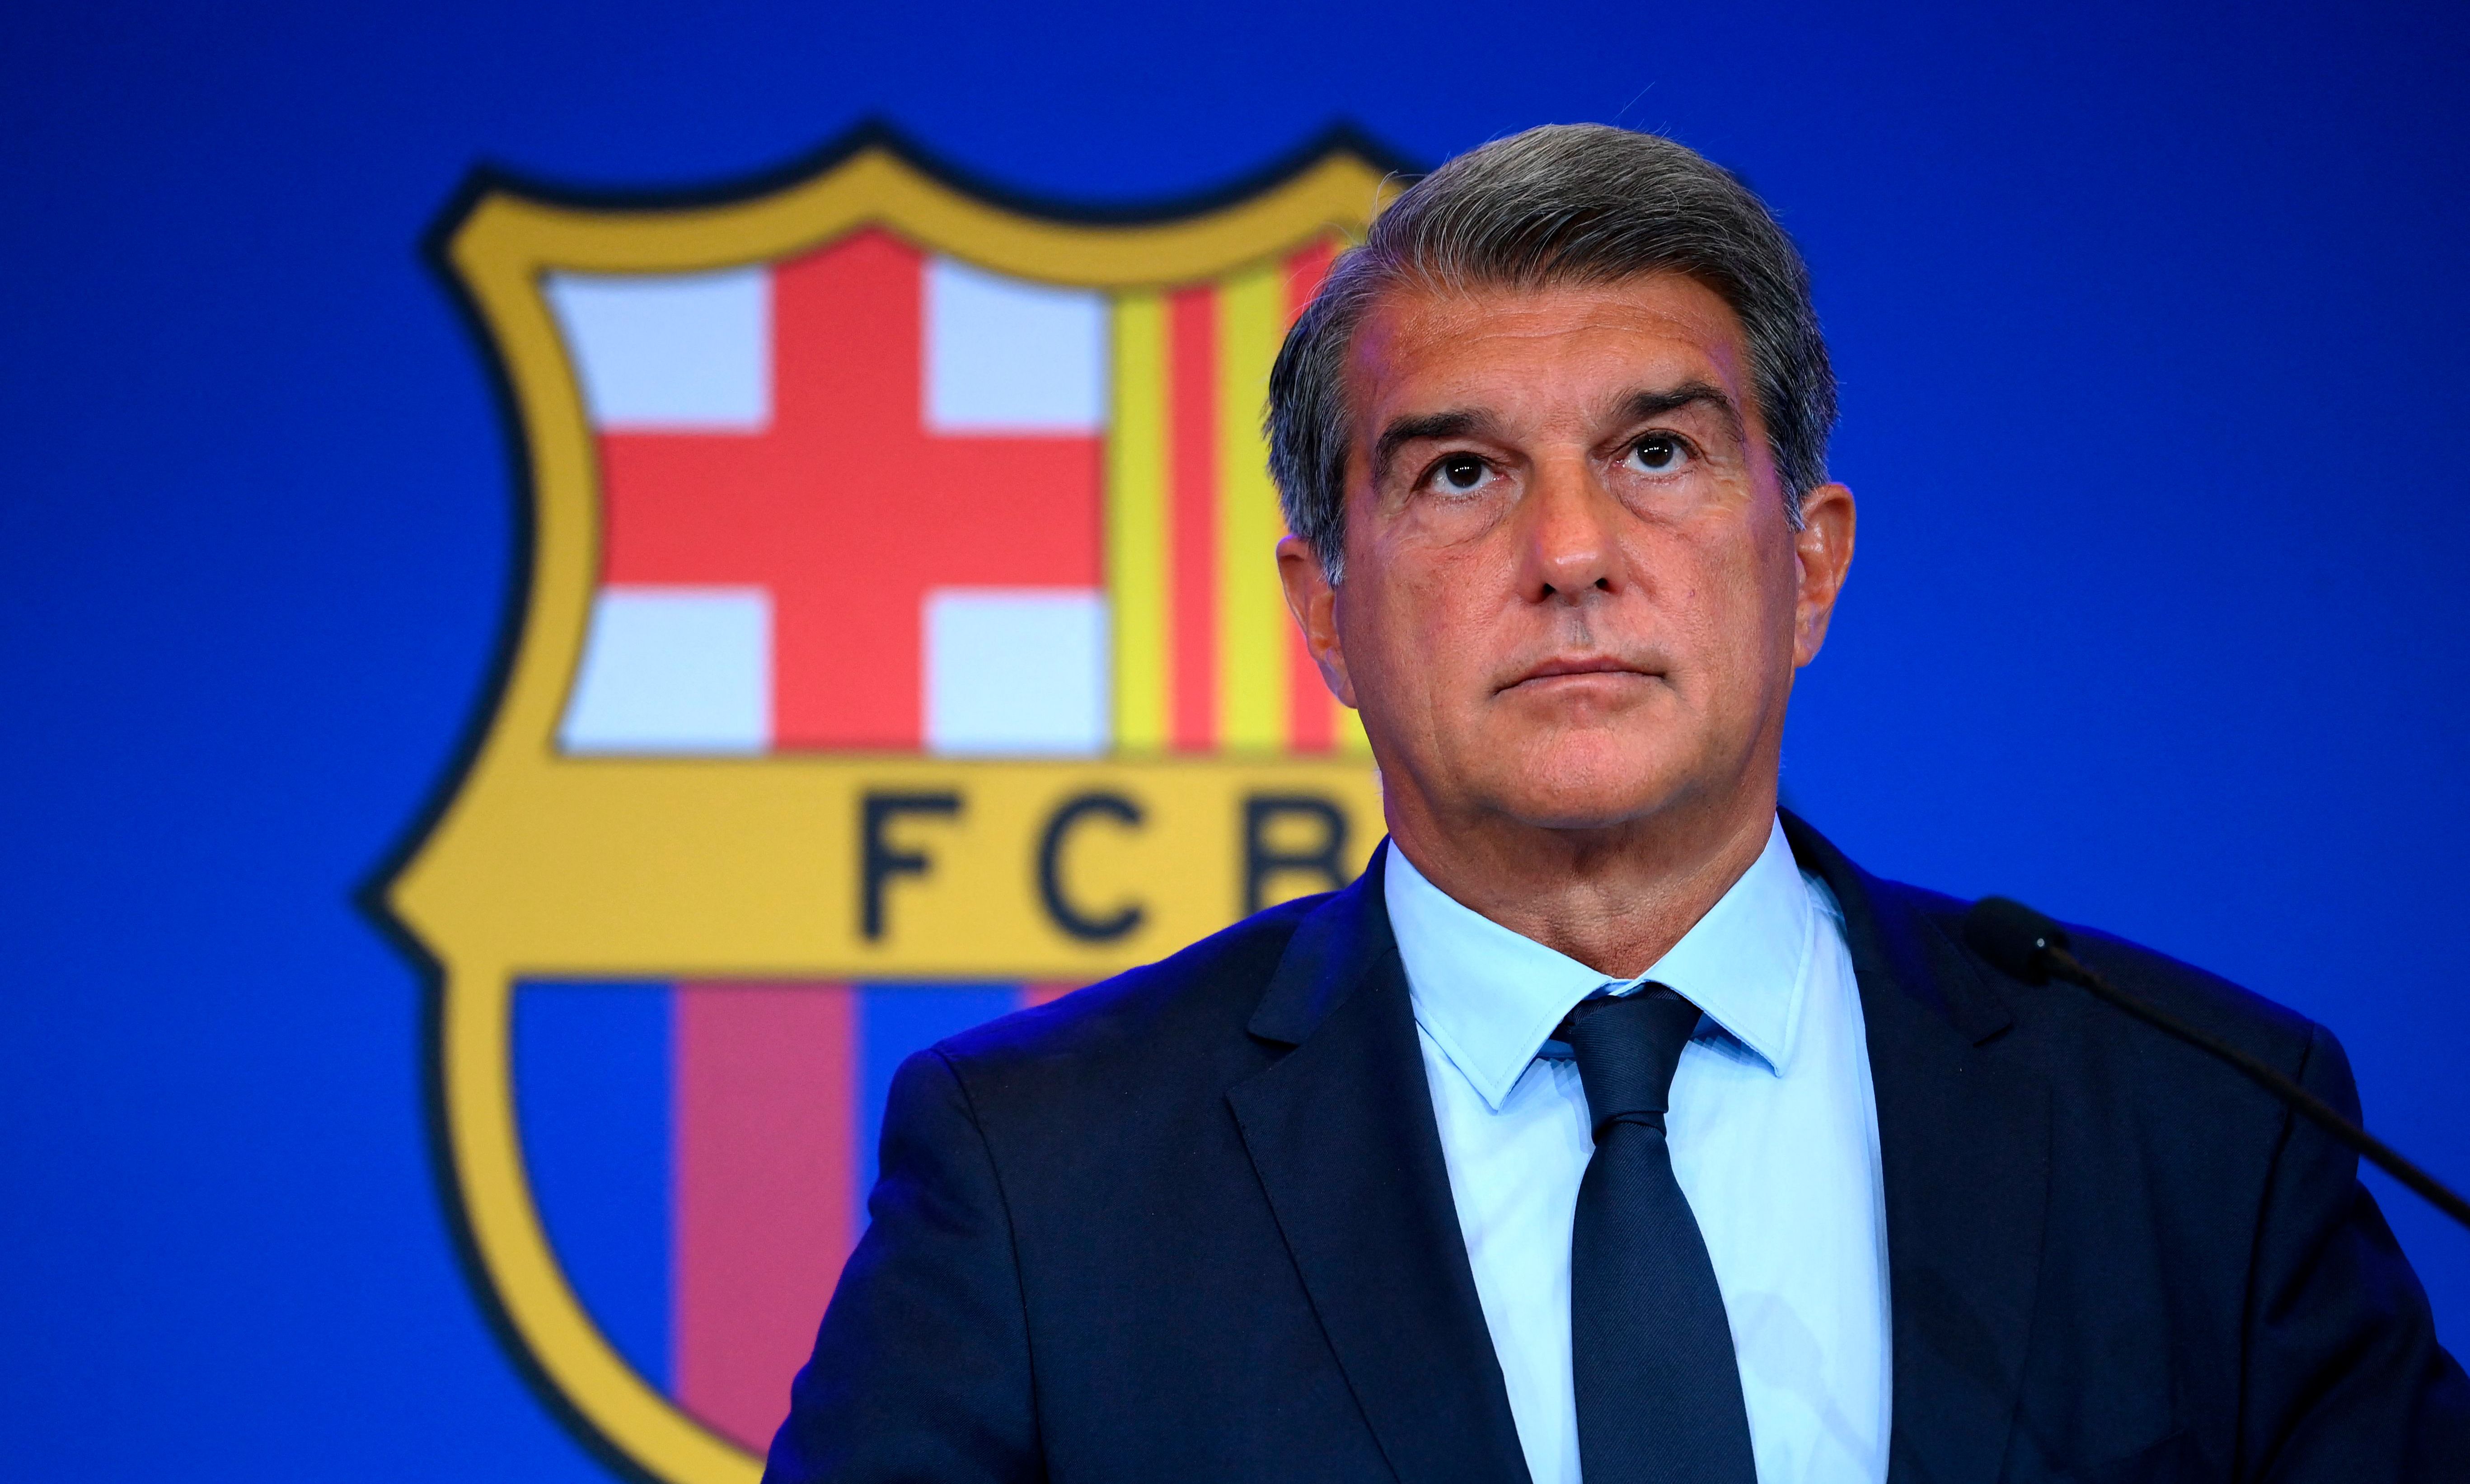 Joan Laporta with a serious gesture